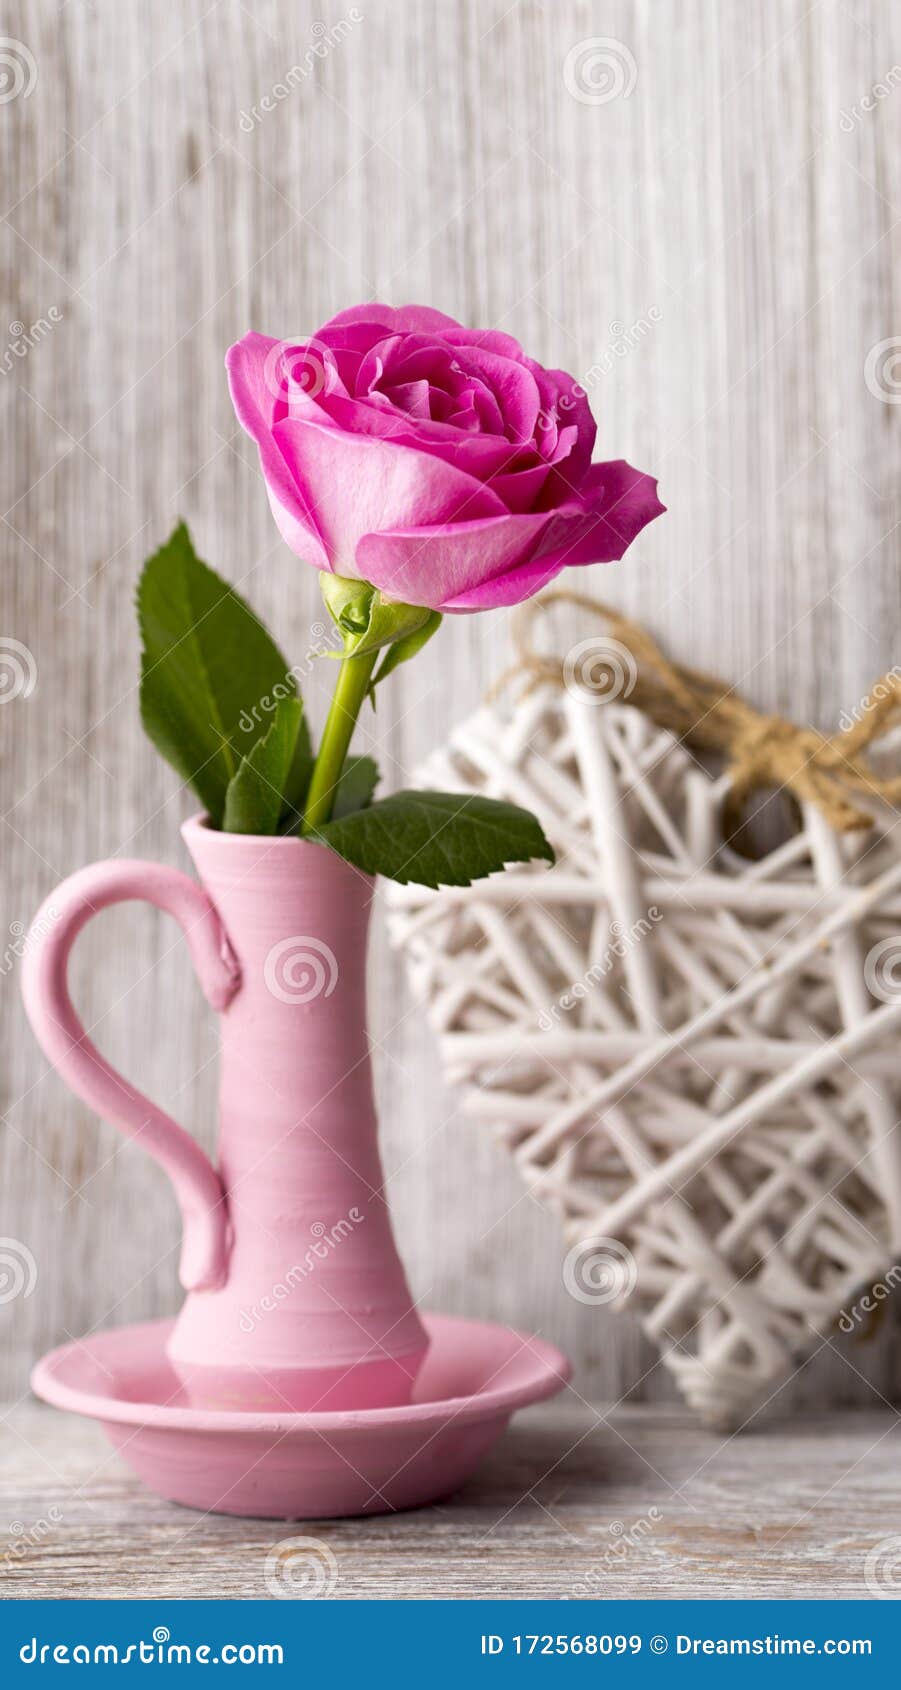 Most Beautiful Fresh Rose Look! Stock Image - Image of place, love ...